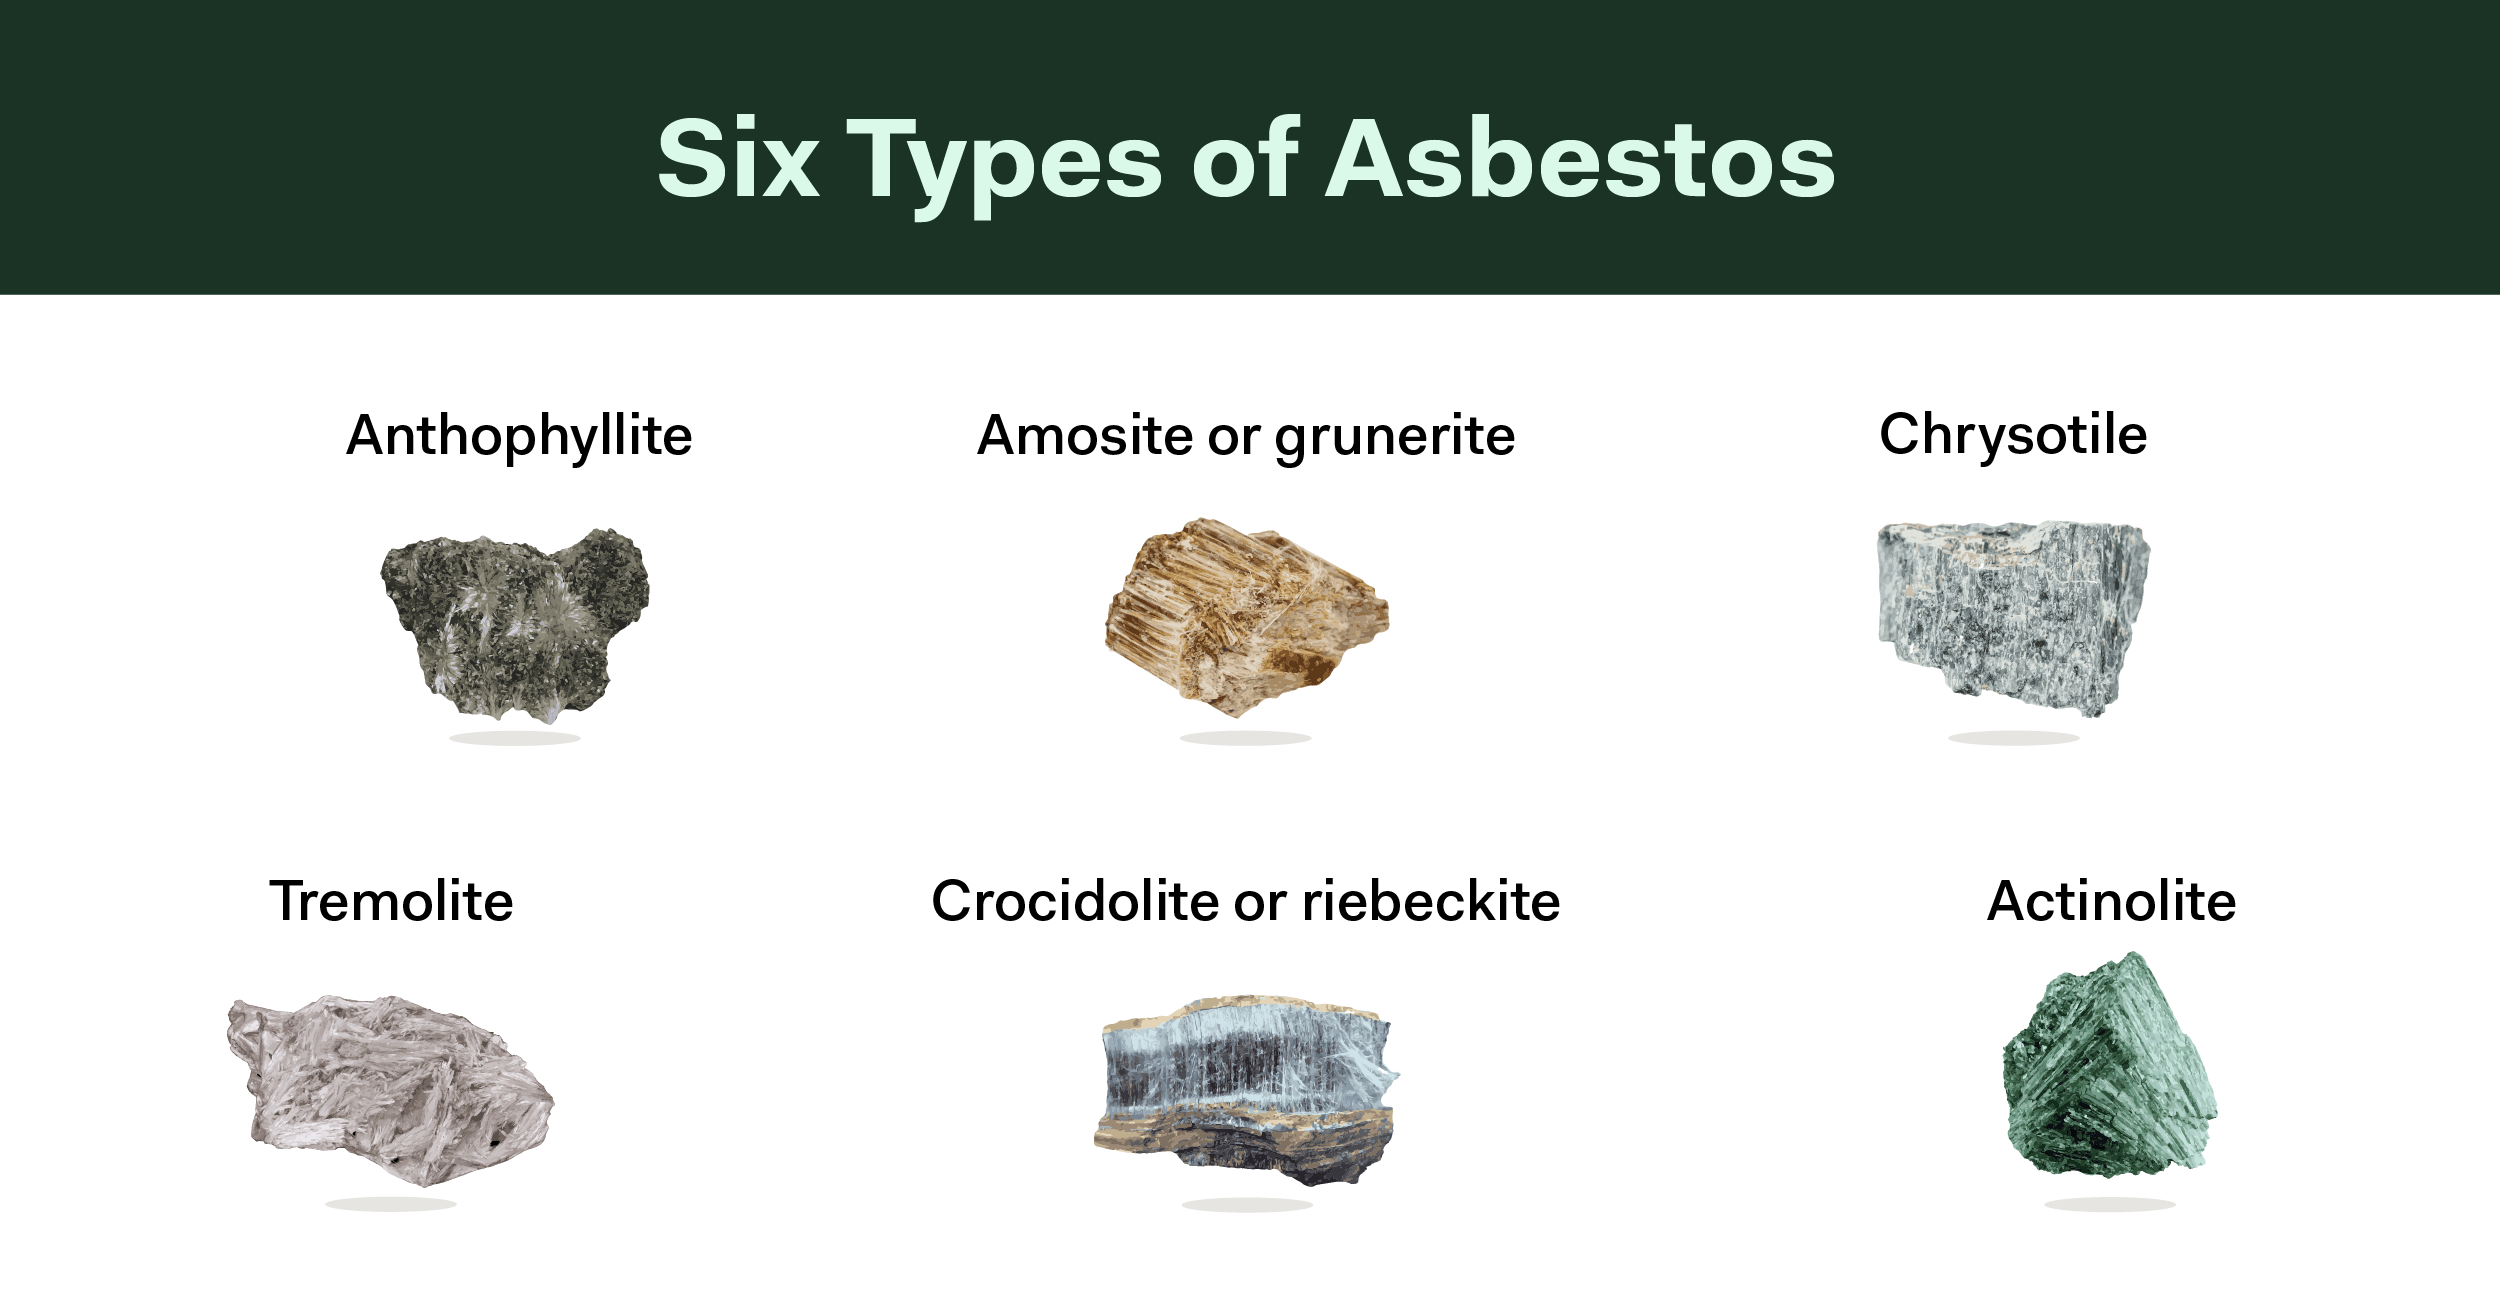 How can you identify asbestos